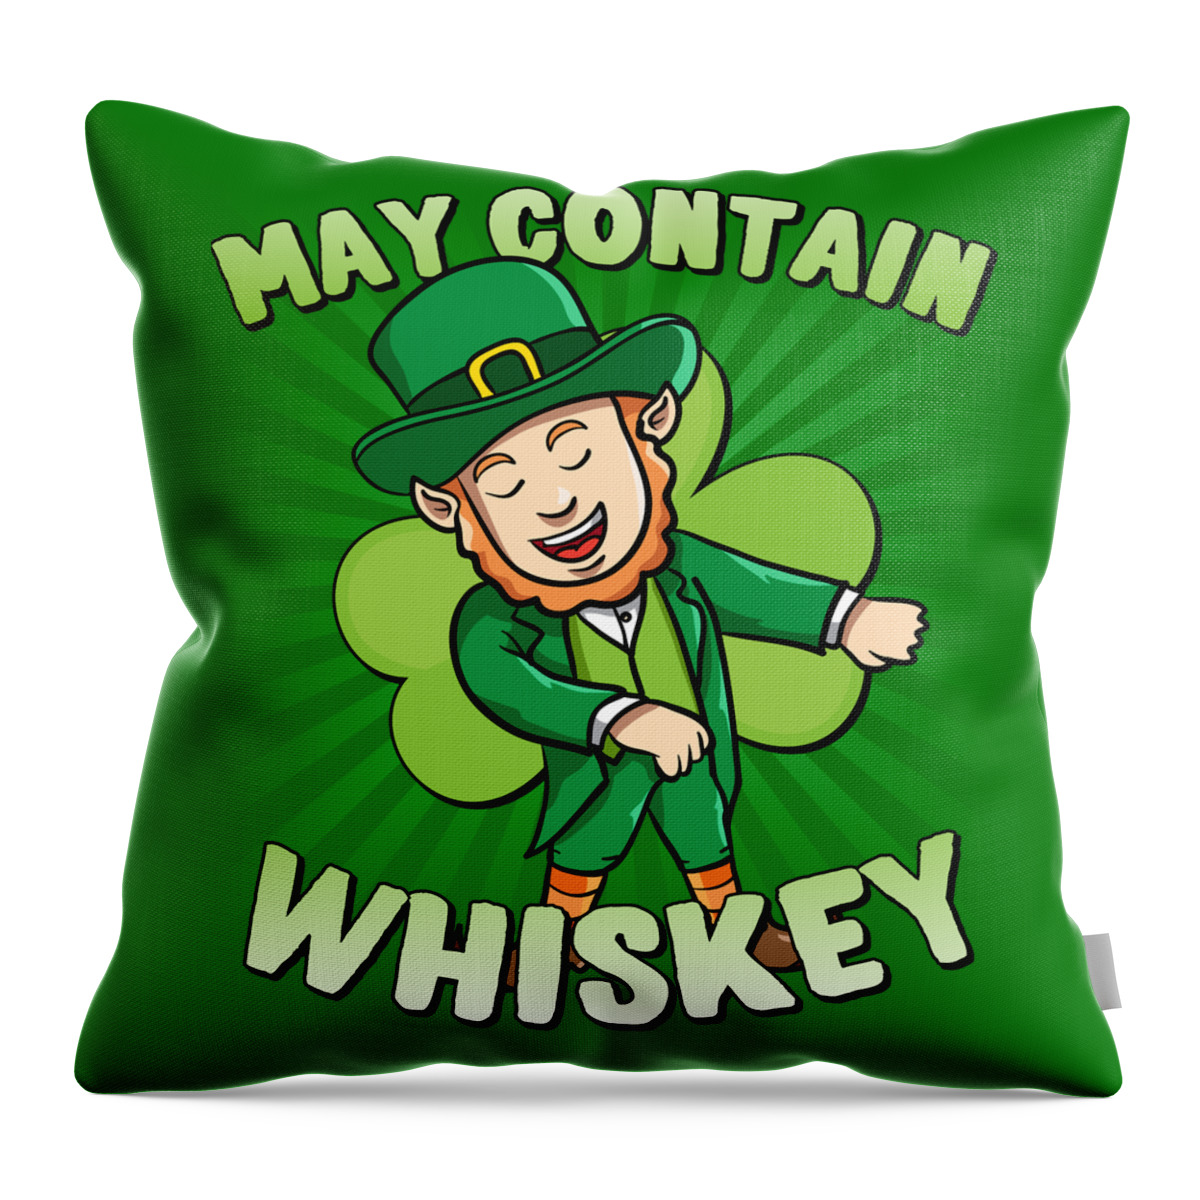 Cool Throw Pillow featuring the digital art May Contain Whiskey St Patricks Day by Flippin Sweet Gear